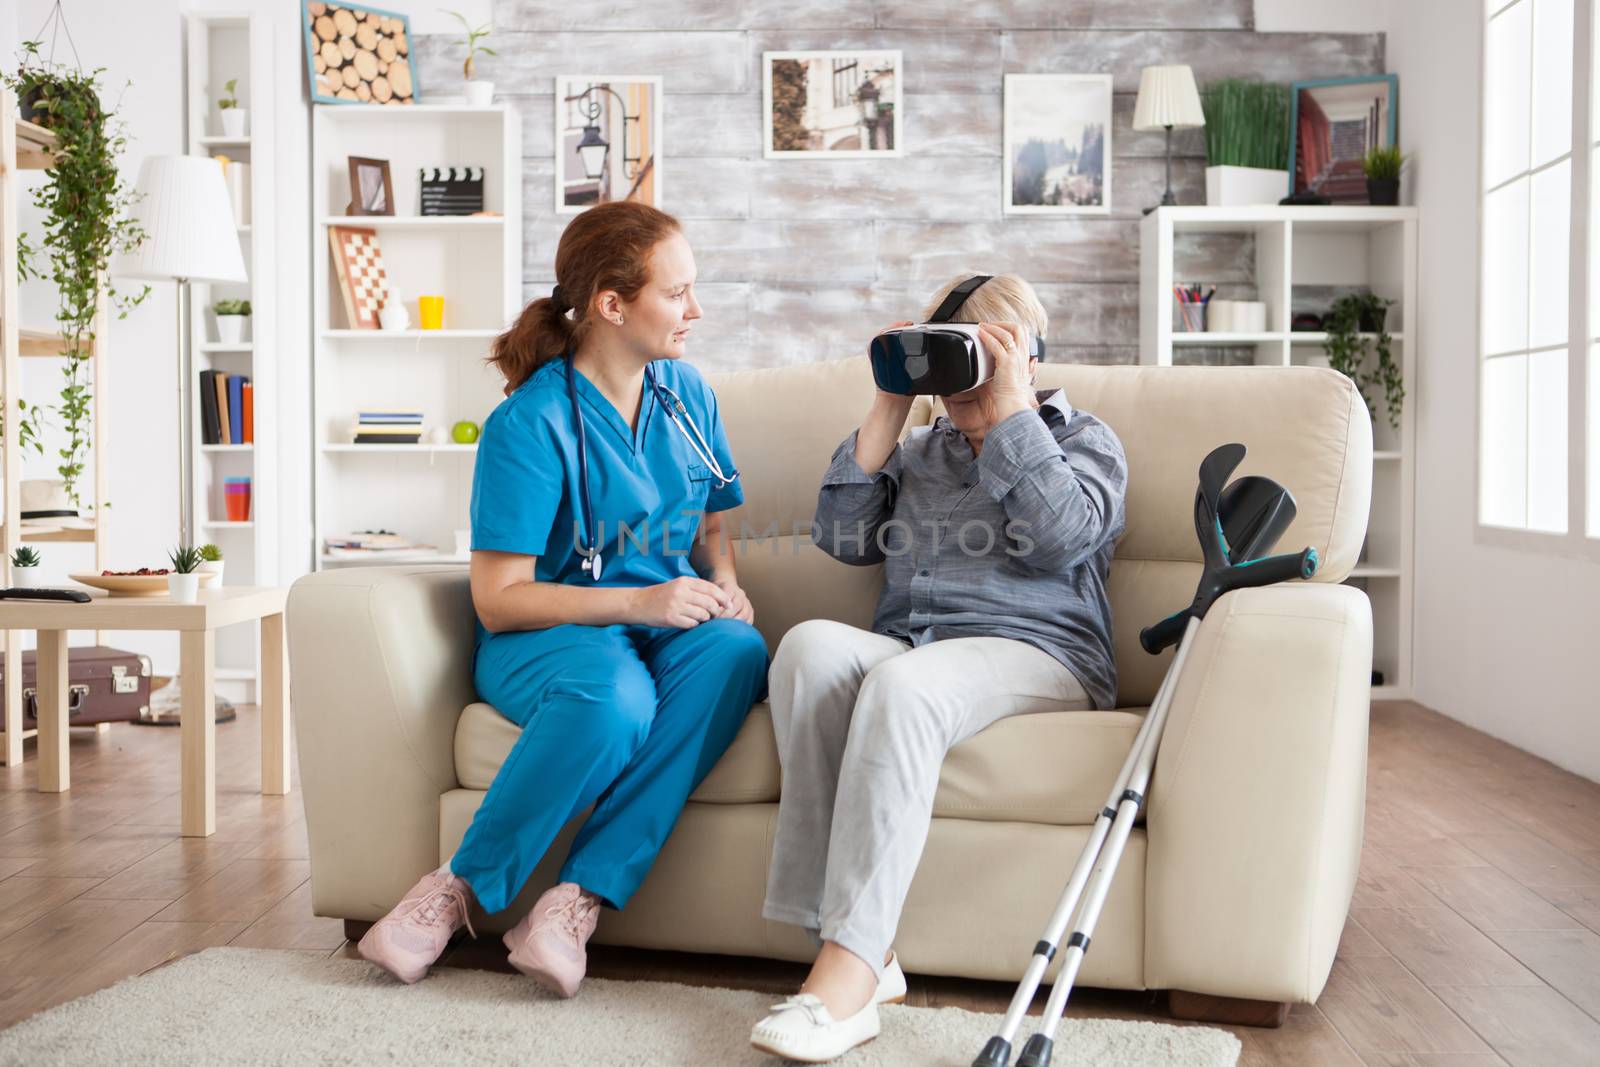 Old with with crutches in nursing home using virtual reality glasses by DCStudio